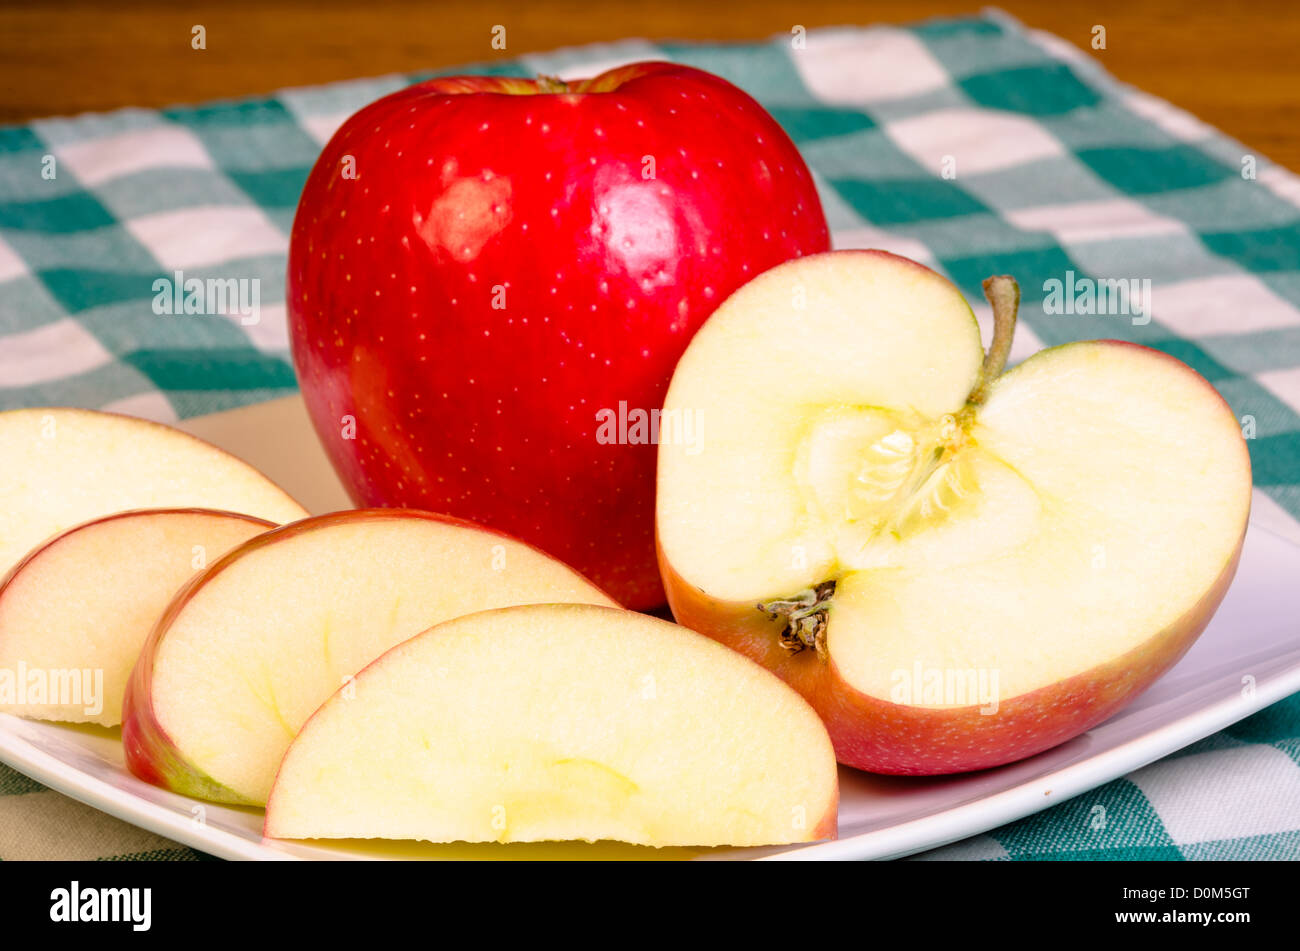 Fresh red apple sliced on a white plate Stock Photo